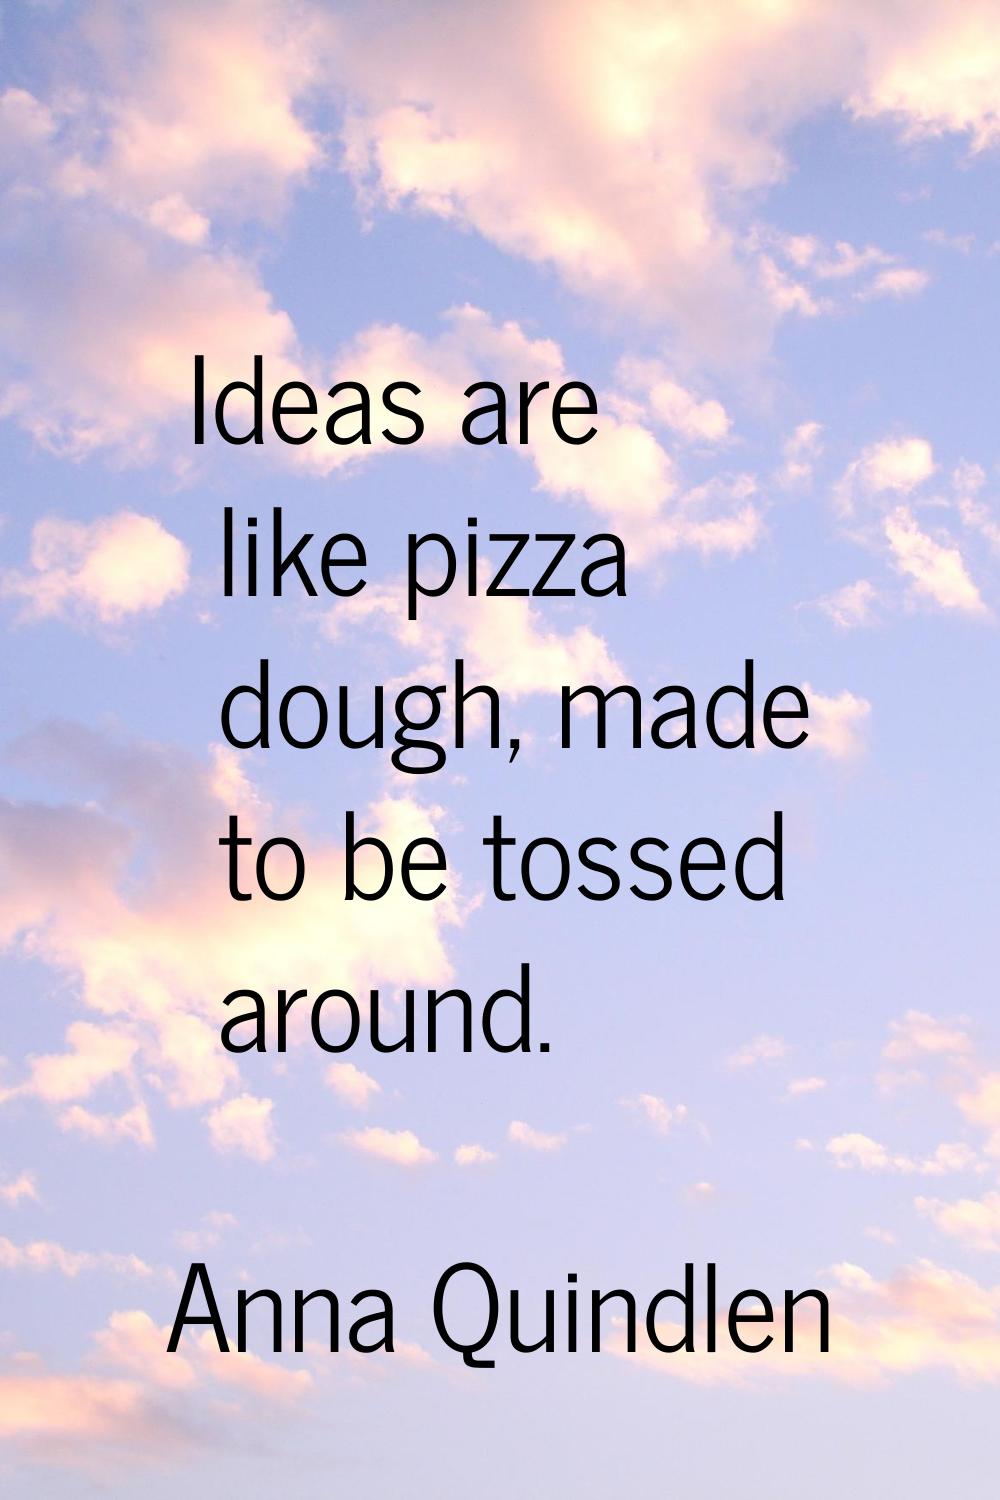 Ideas are like pizza dough, made to be tossed around.